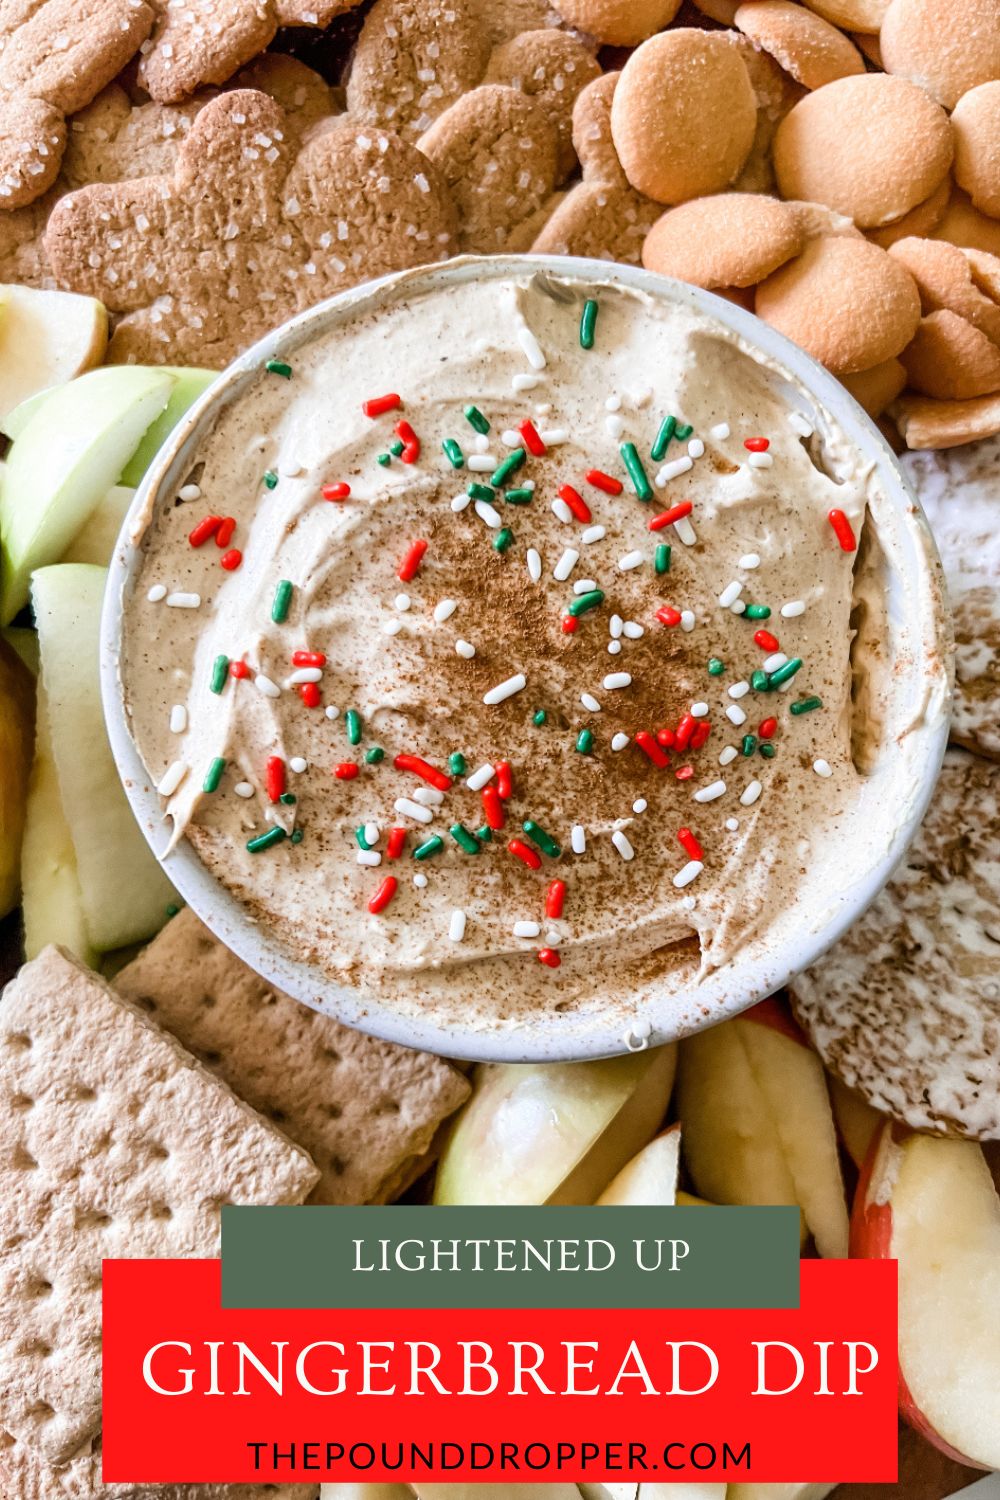  Have you been looking for a new no-bake Christmas dessert or appetizer? Well, here you go! This Lightened Up Gingerbread Cheesecake Dip is full of holiday flavors like gingerbread, sweet molasses, cinnamon, and nutmeg! It's super creamy and is the perfect to dip with apples or graham crackers! via @pounddropper